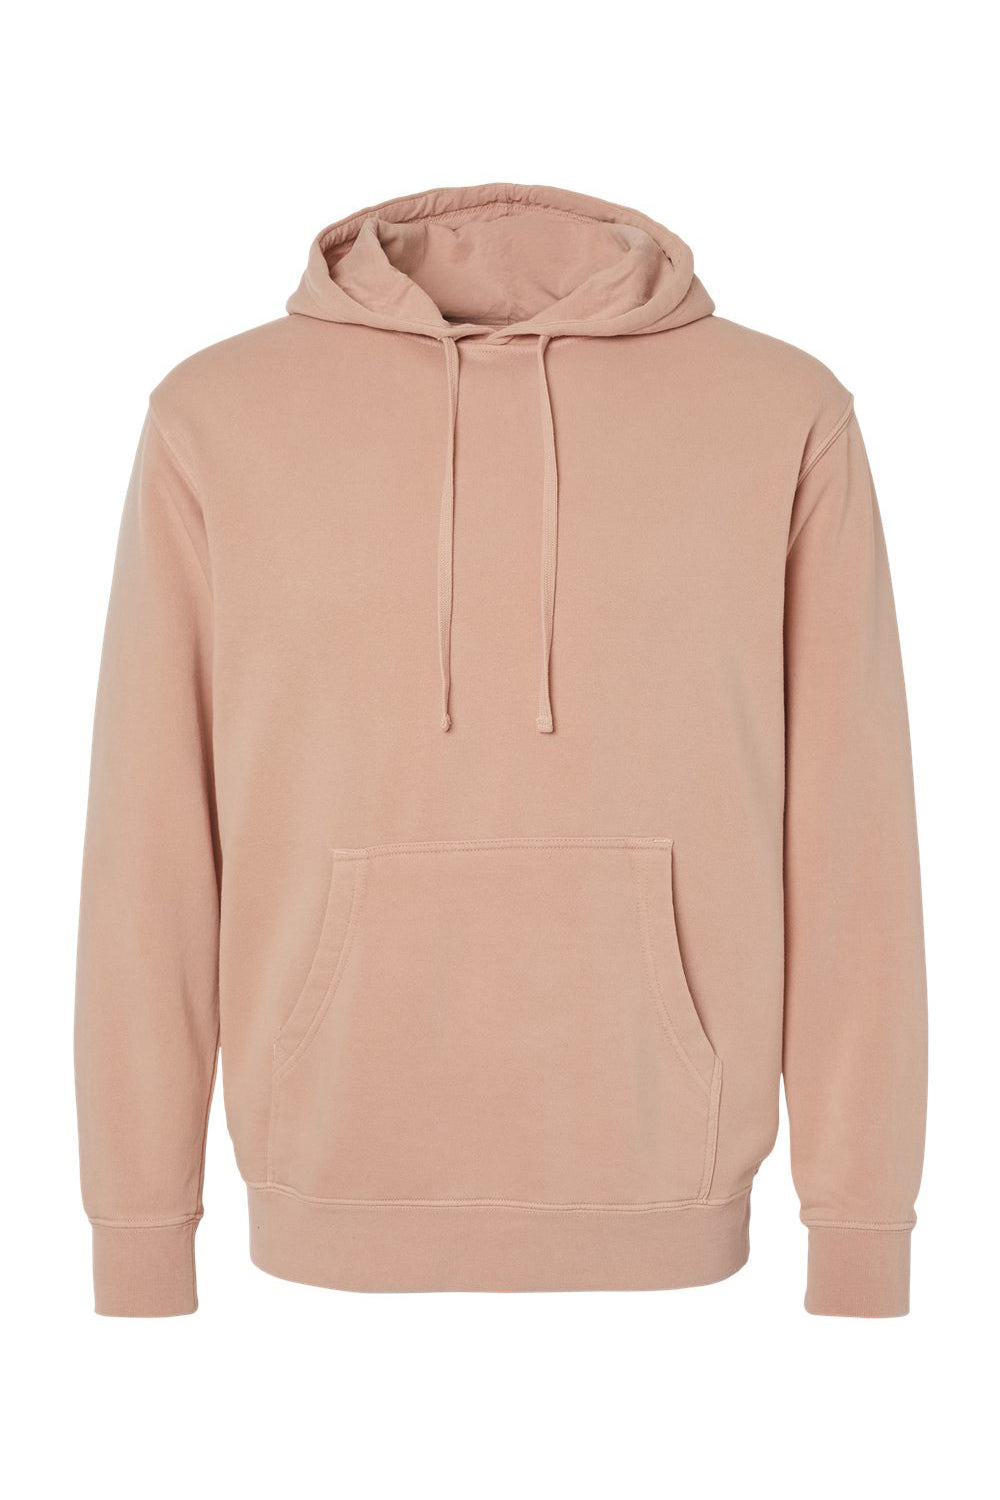 Independent Trading Co. PRM4500 Mens Pigment Dyed Hooded Sweatshirt Hoodie Dusty Pink Flat Front